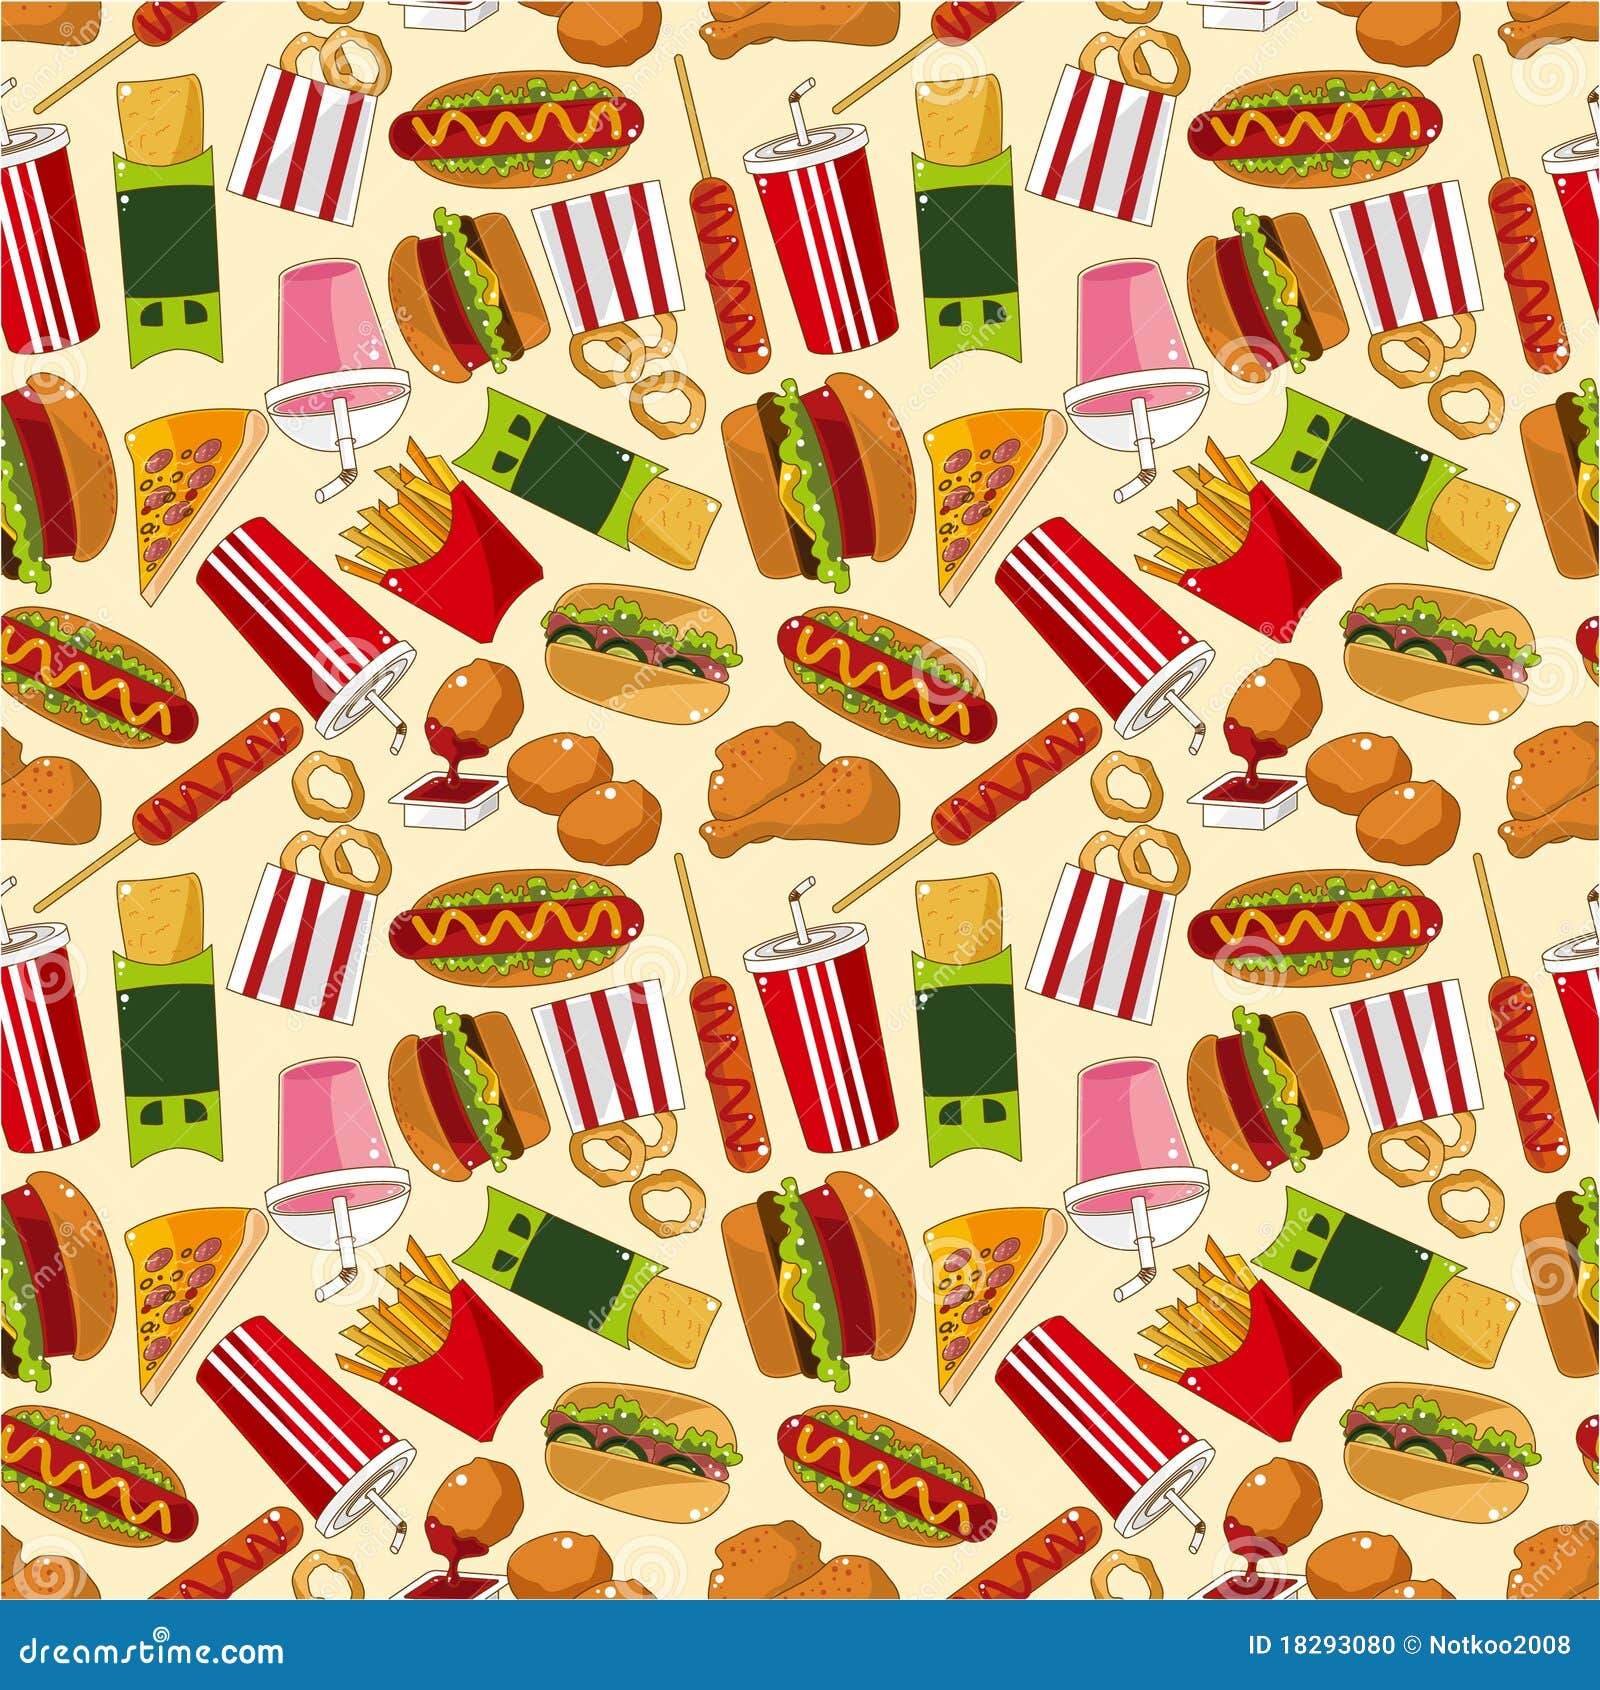 tumblr backgrounds aztec Stock 18293080 Pattern Fast  Photo Food Image: Seamless